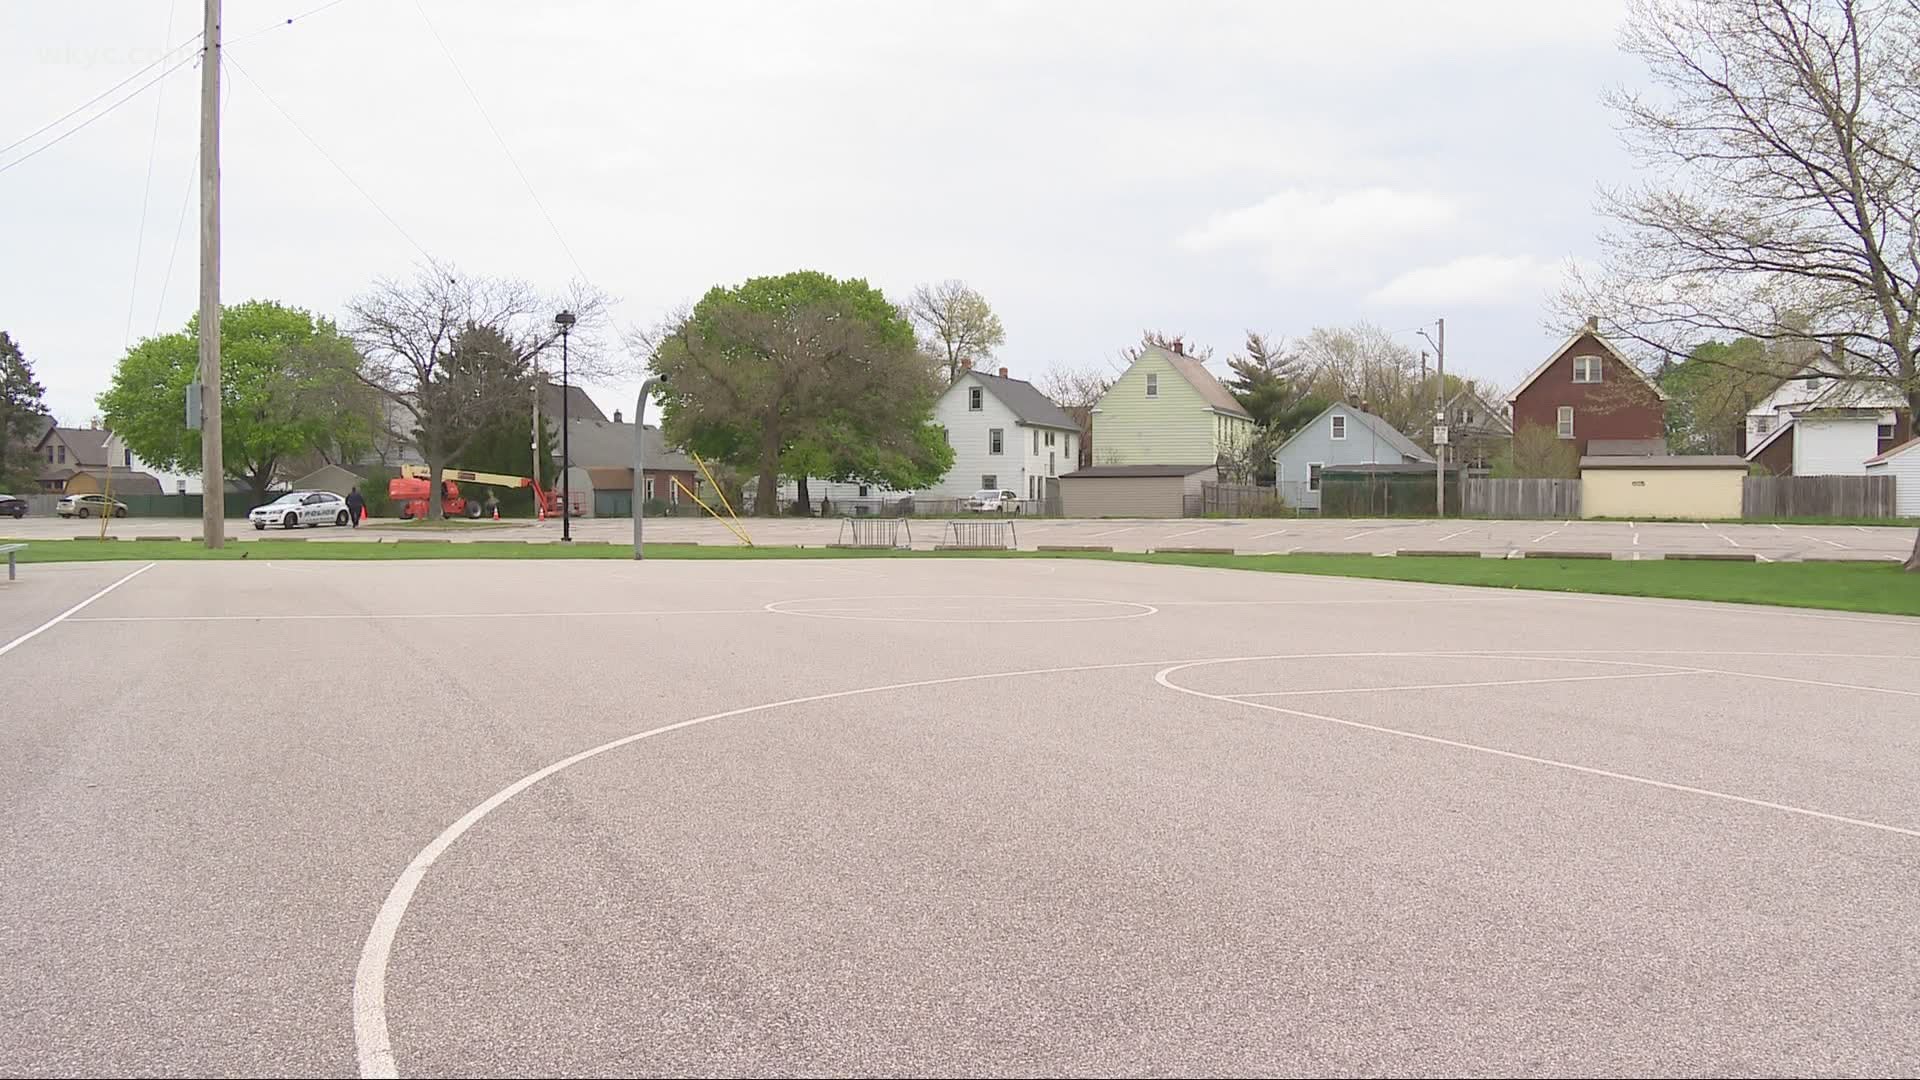 Basketball hoops at Madison Park are temporarily taken down, according to Lakewood’s mayor and police chief. The move comes after two separate shooting incidents.